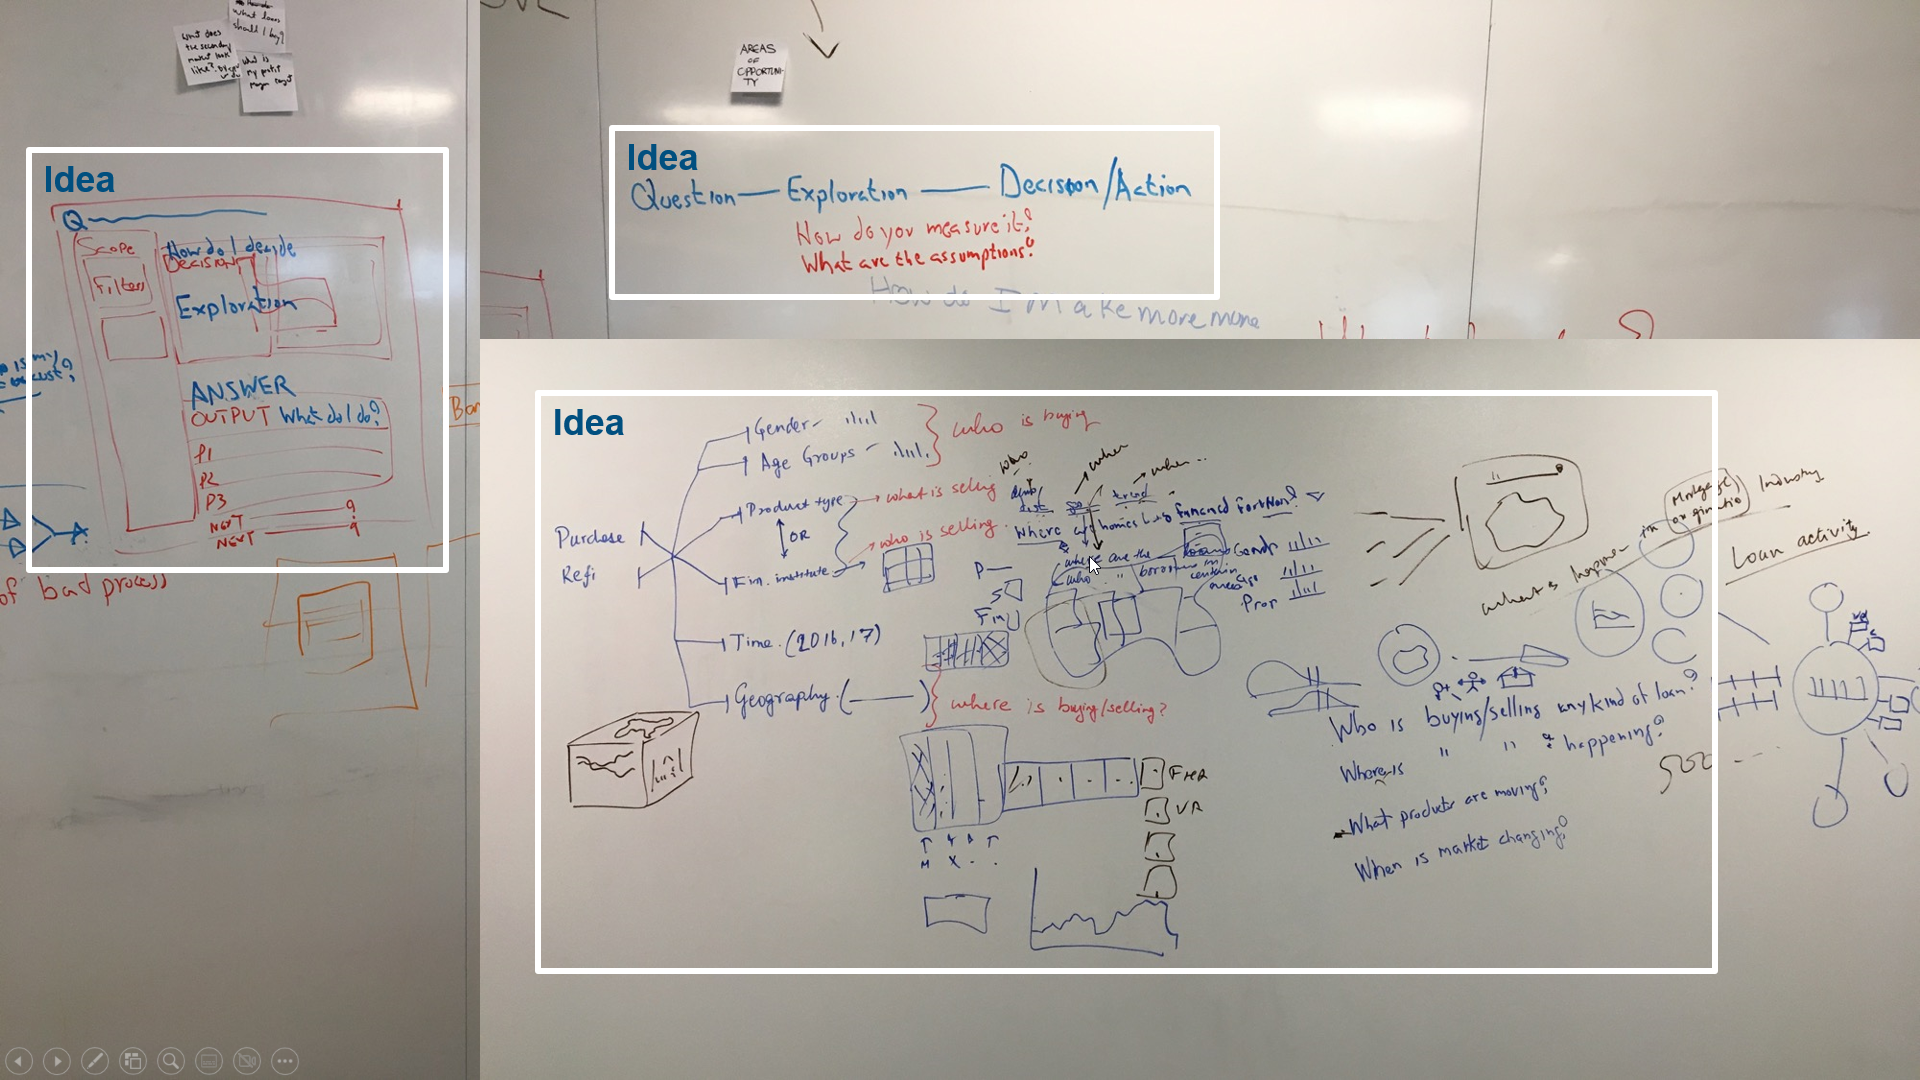 3 pictures of whiteboard with different ideas